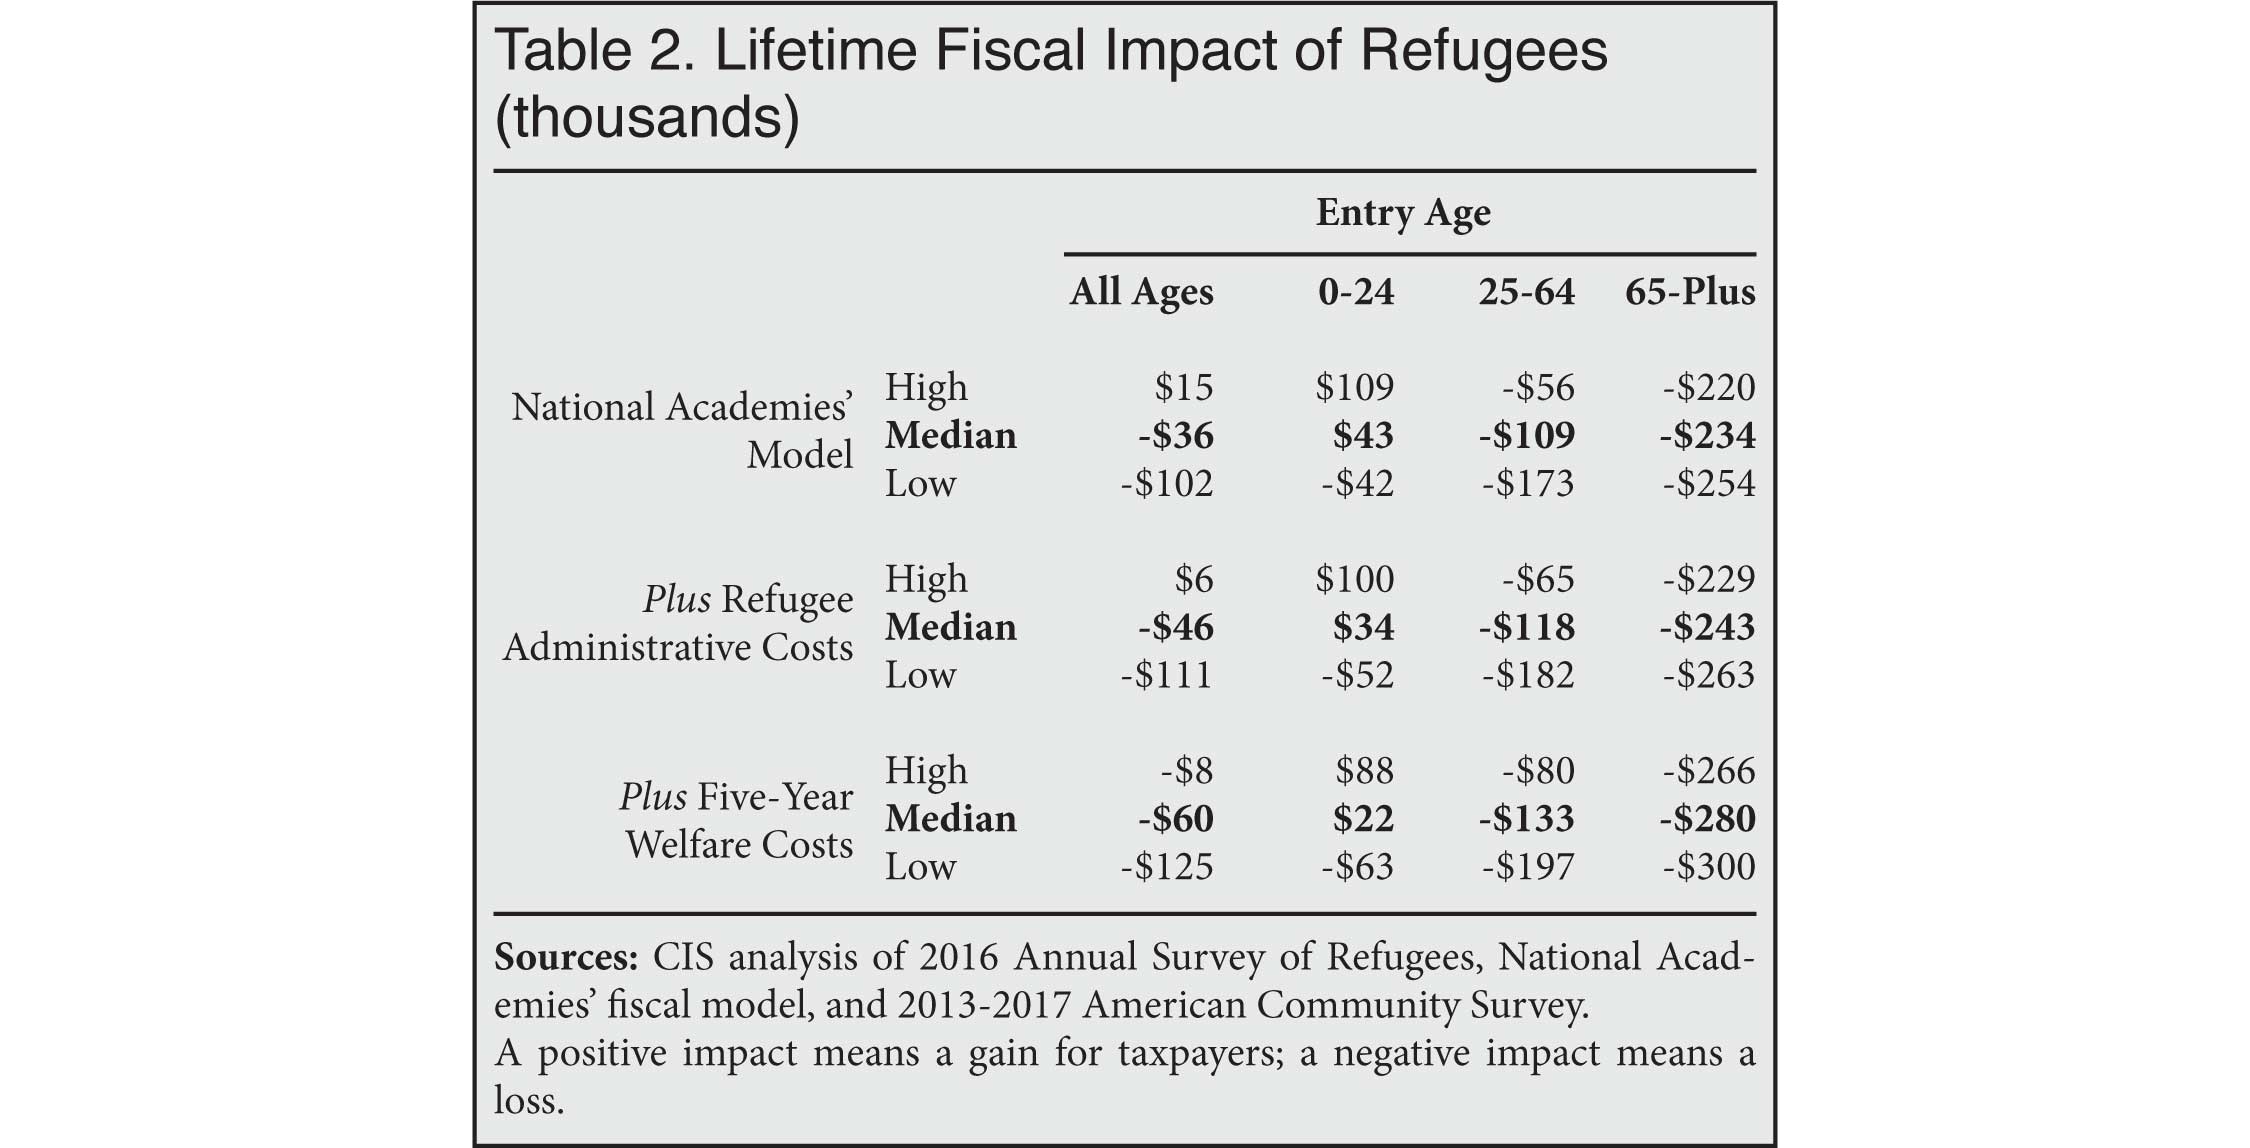 Table: Lifetime Fiscal Impact of Refugees